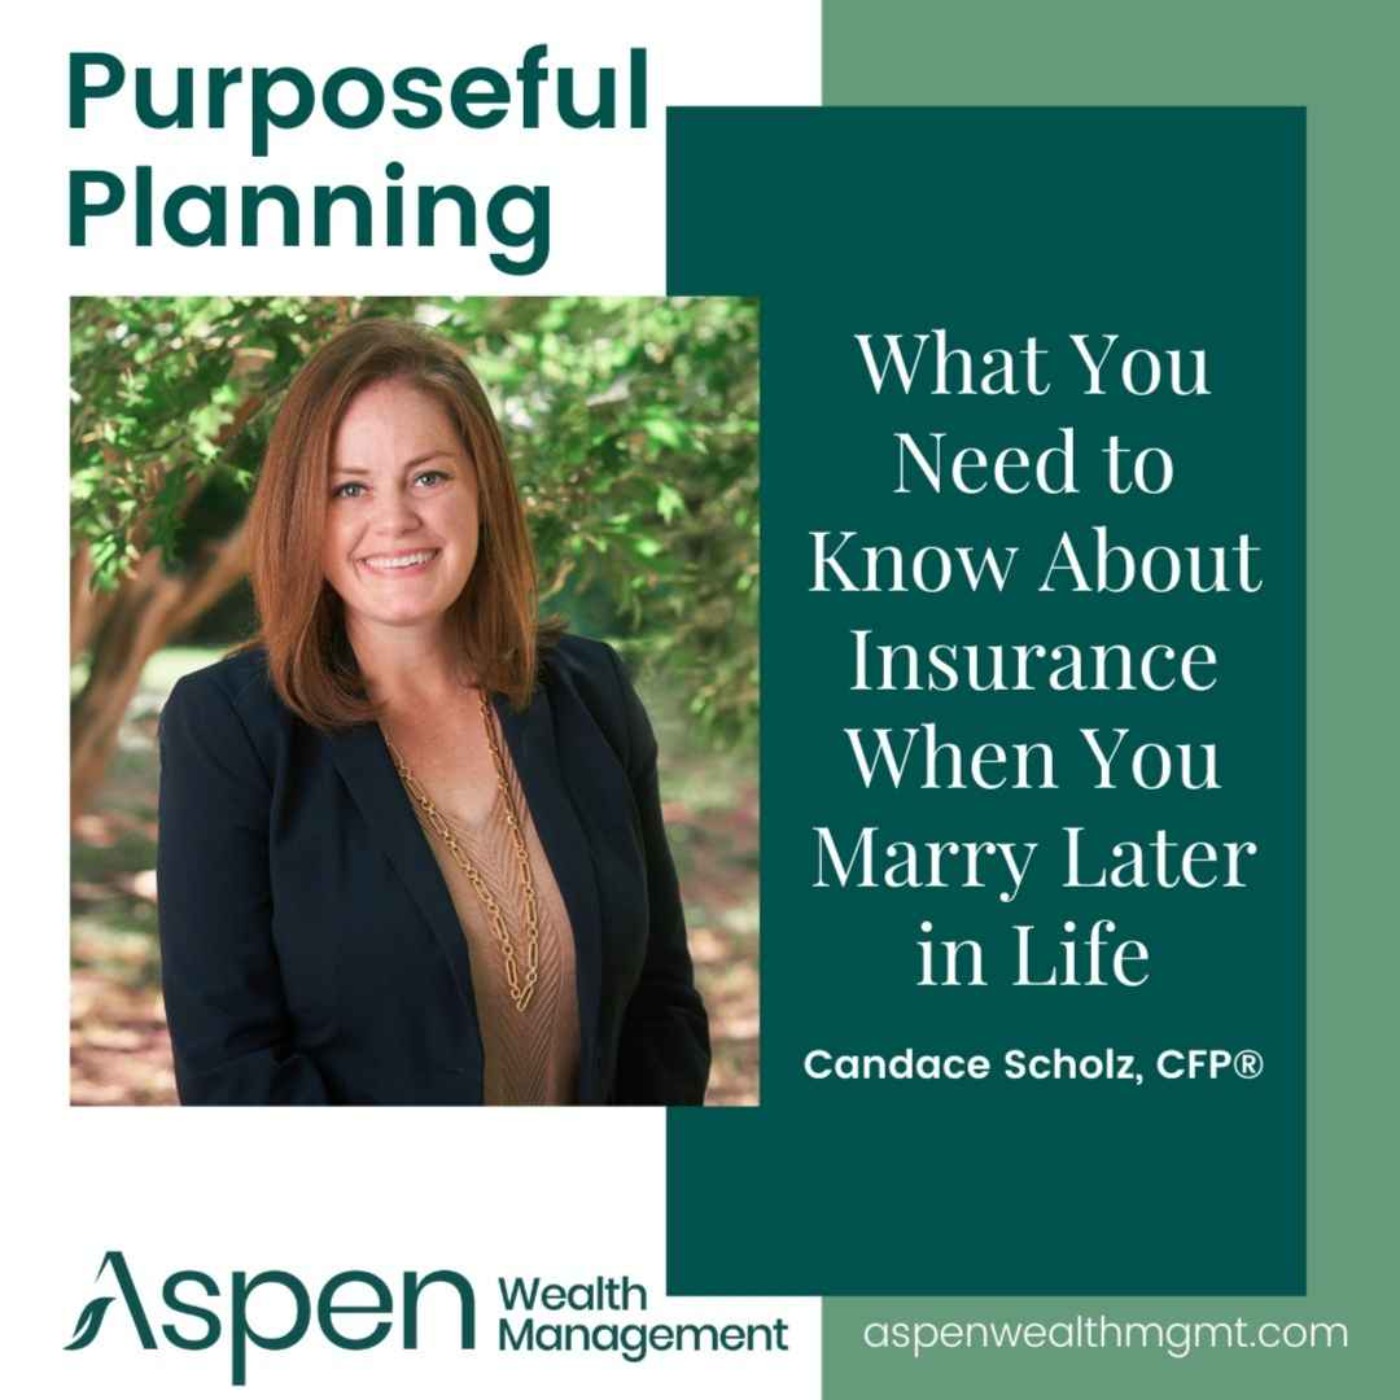 What to Know About Insurance When You Marry Later in Life, Part 1